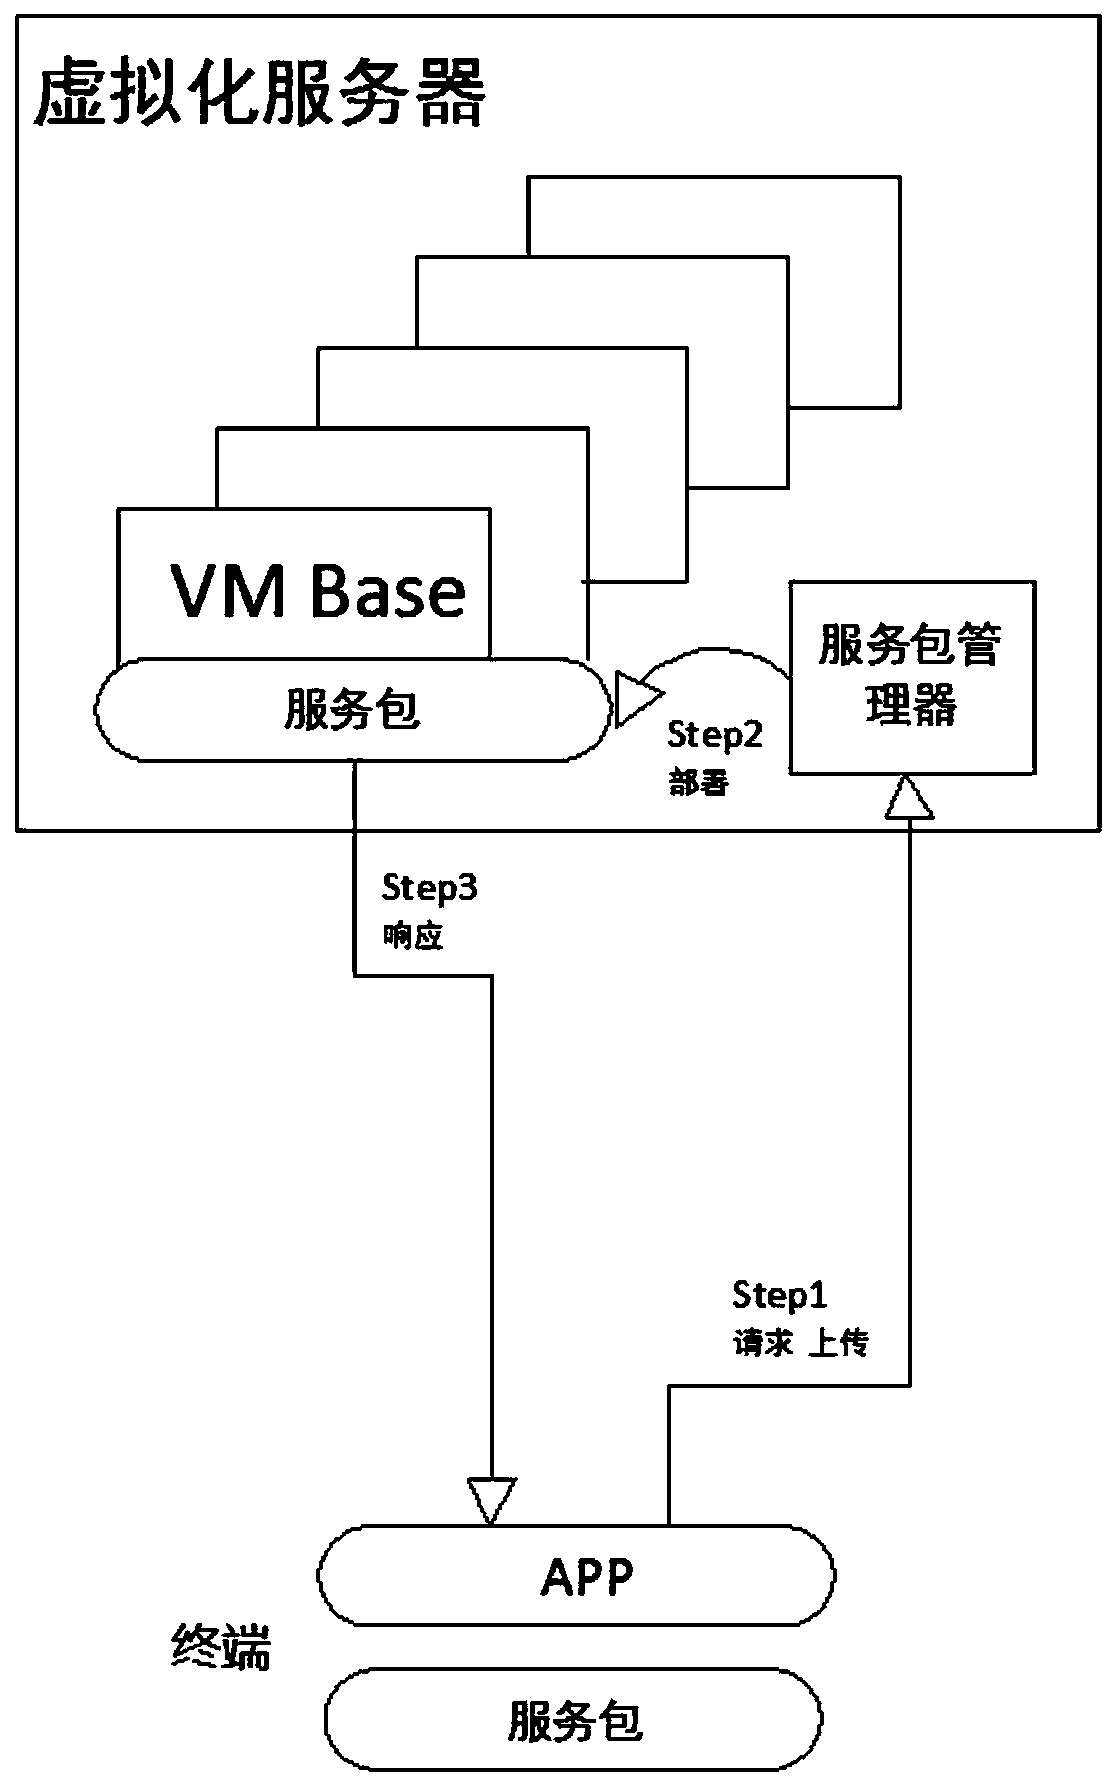 Virtualization multi-purpose cloud service implementation structure and method based on Open Stack